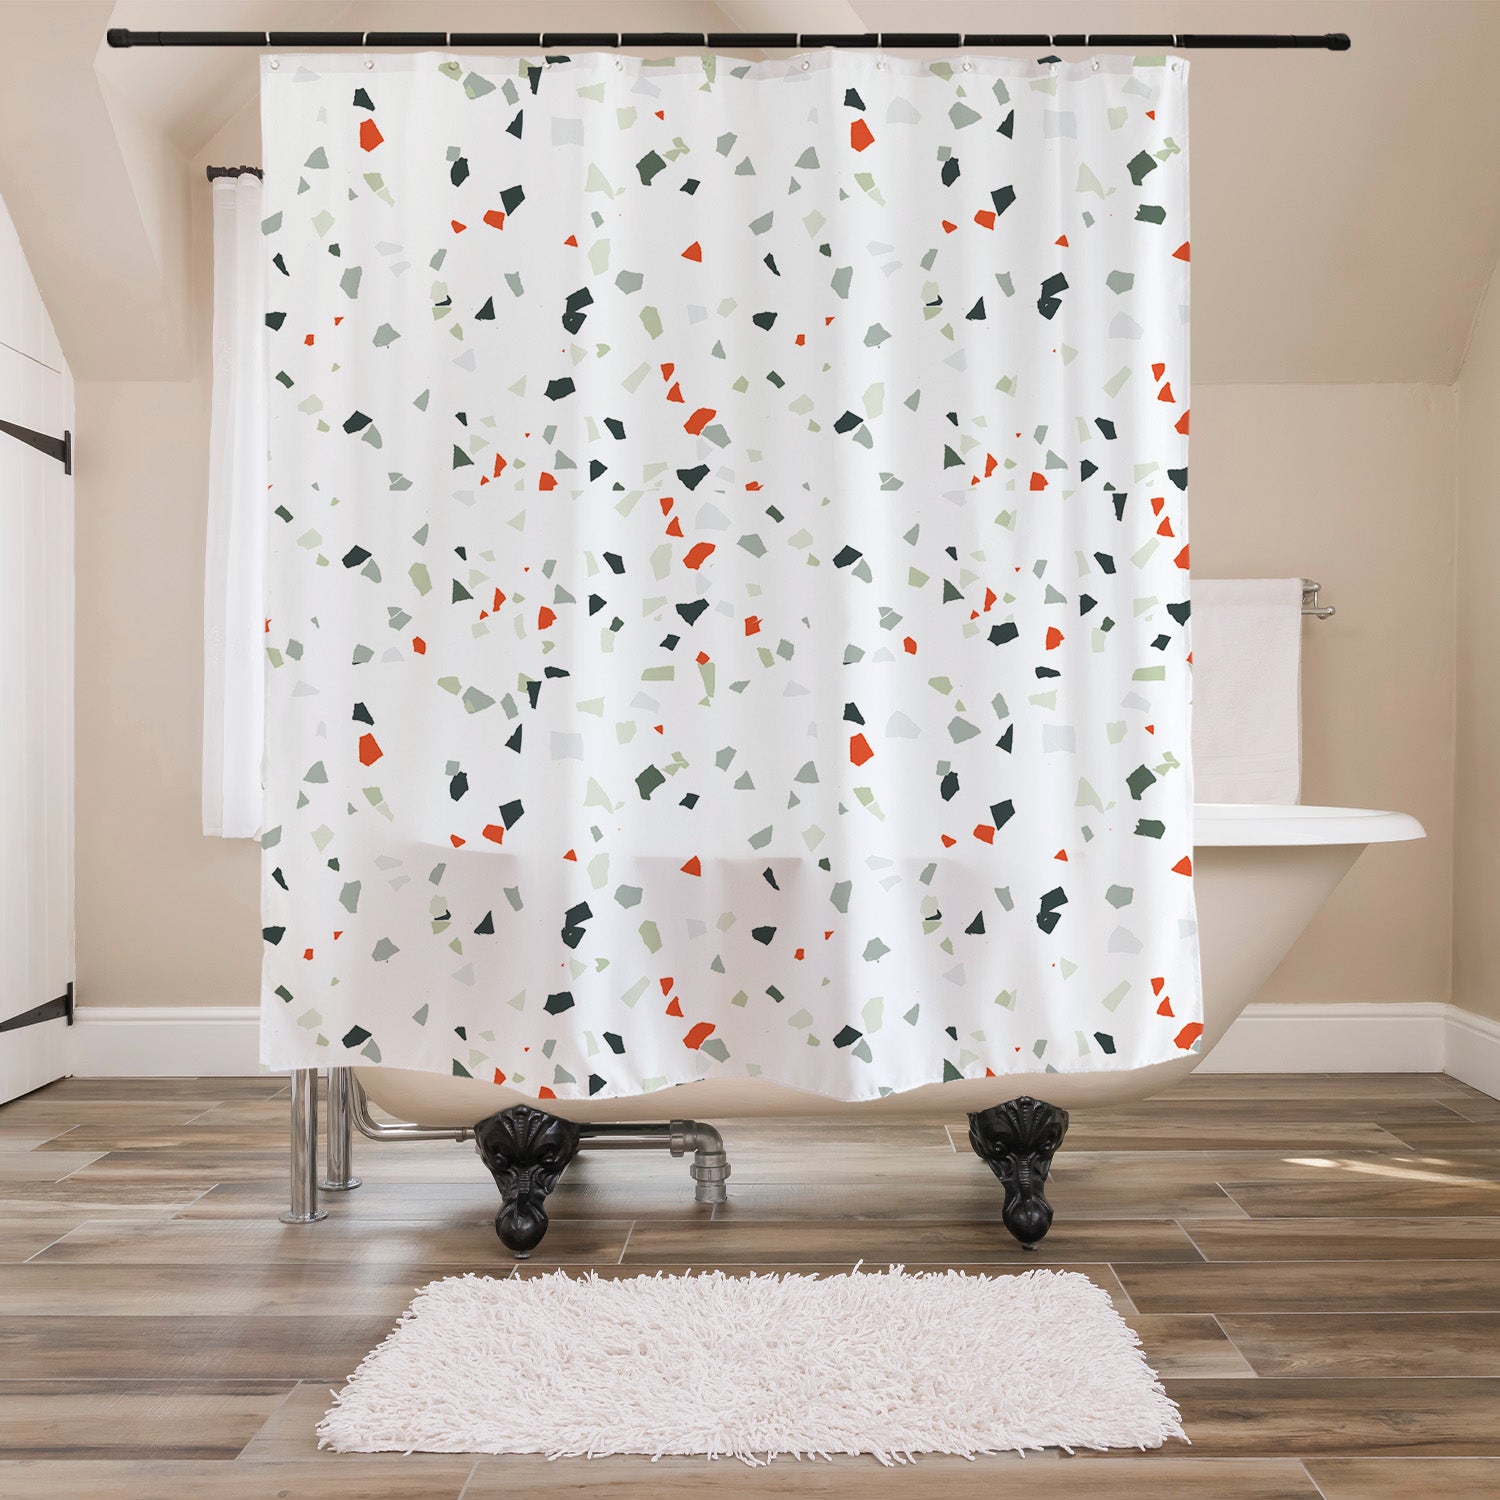 Feblilac Terrazzo Pattern Road Shower Curtain with Hooks